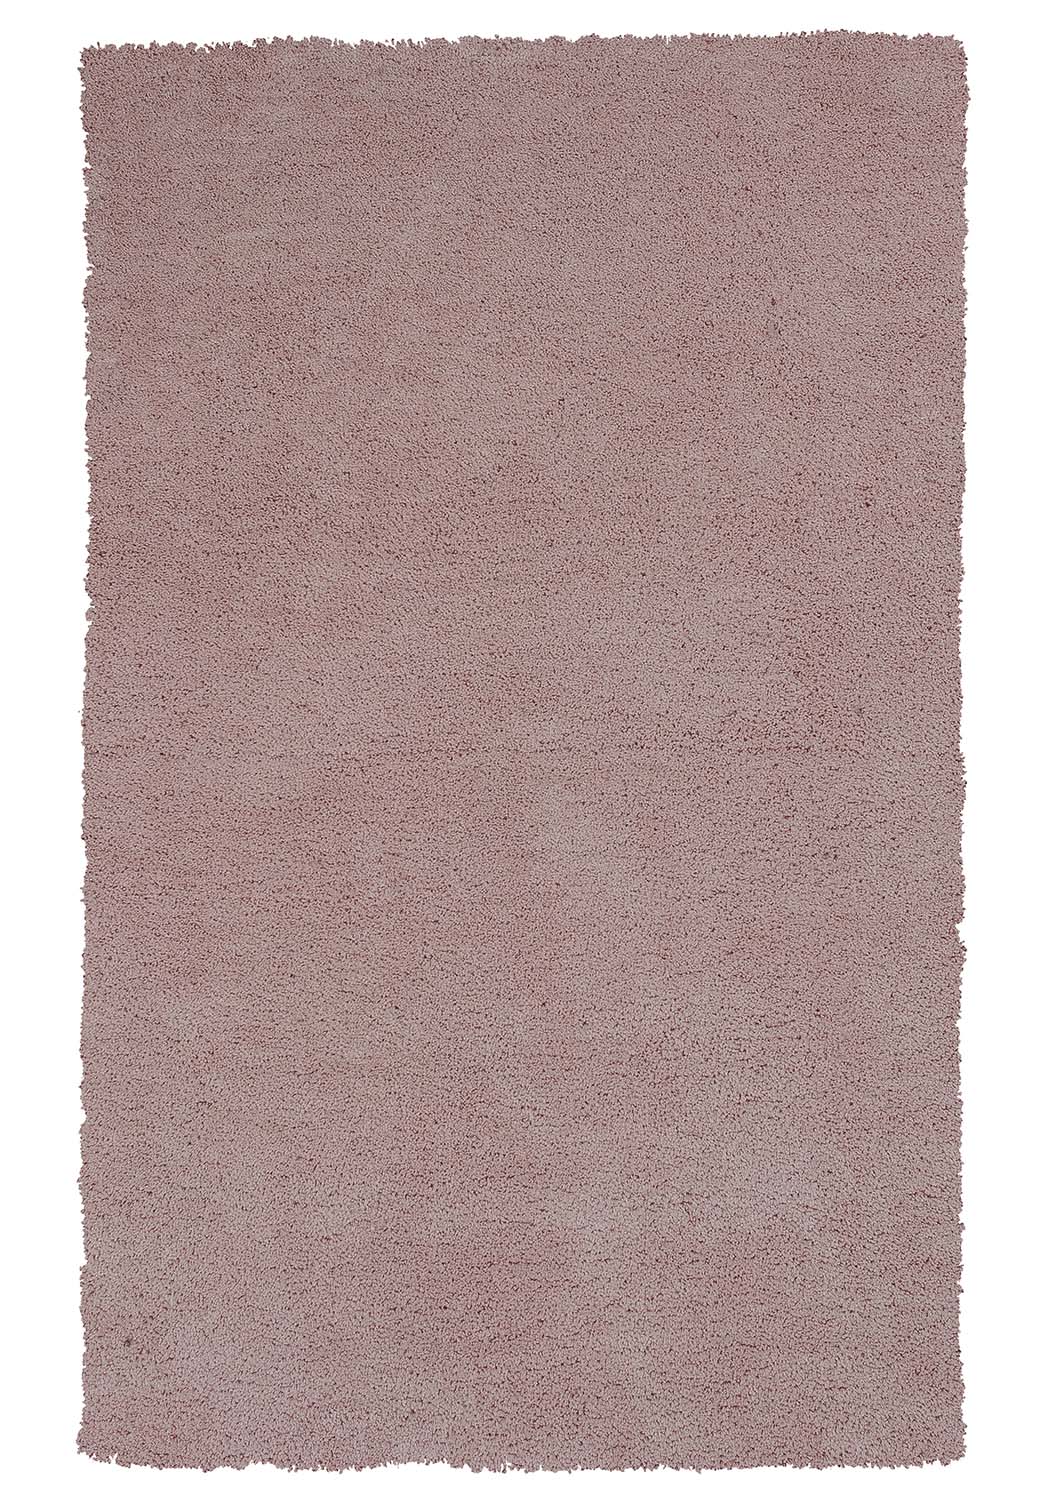 Bliss 1575 Rose Pink Shag Area Rug Product Image